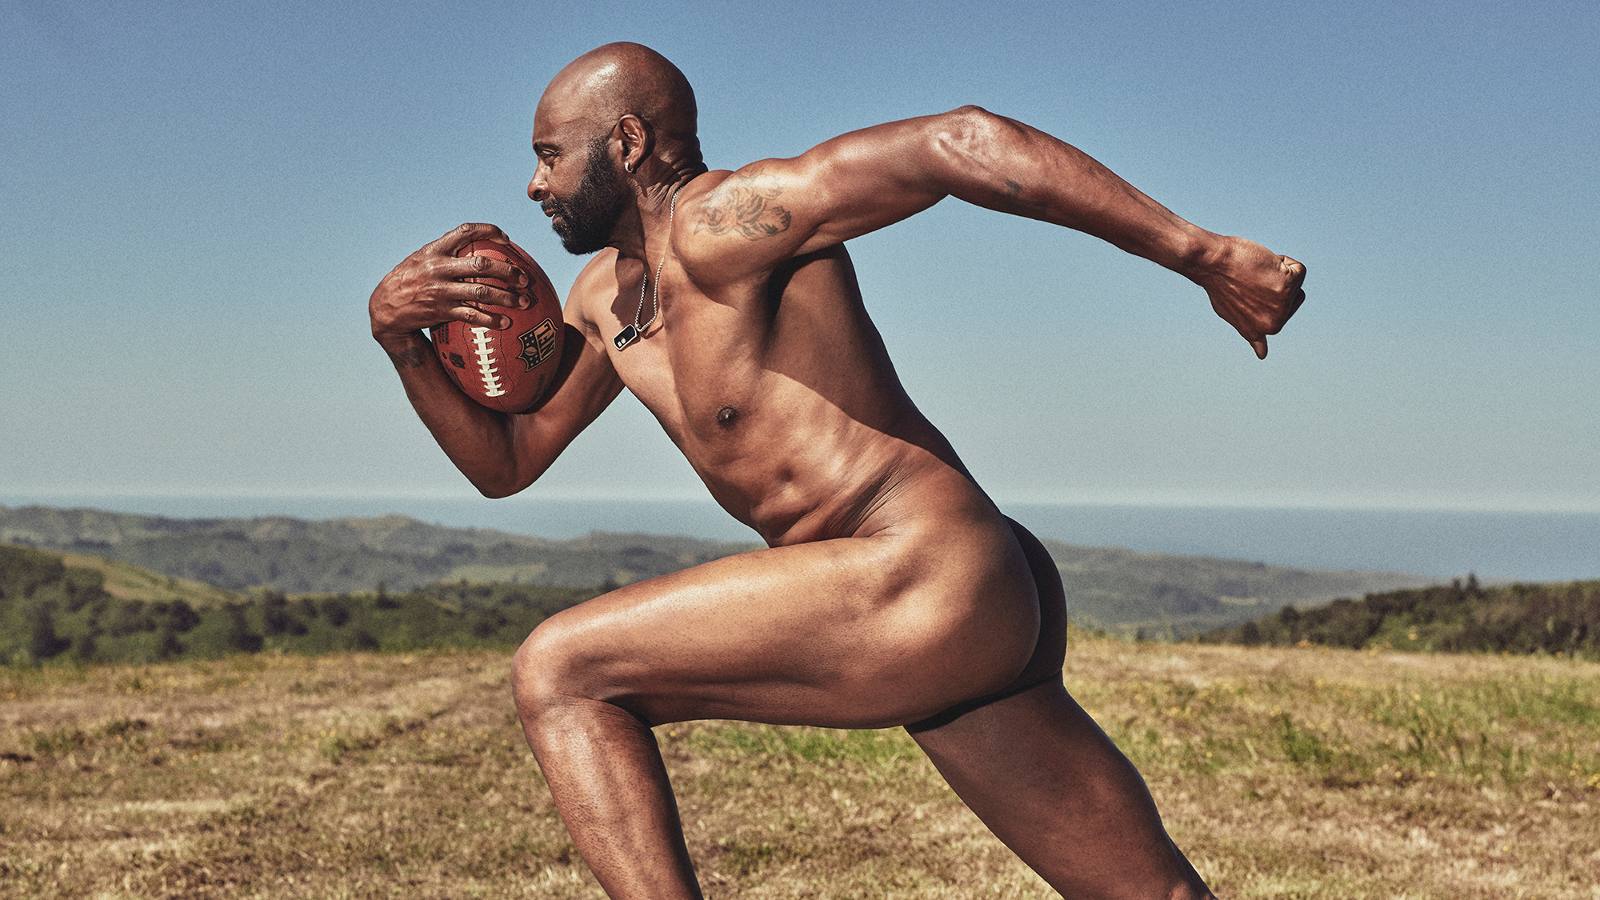 ESPN: THE BODY ISSUE - JERRY RICE